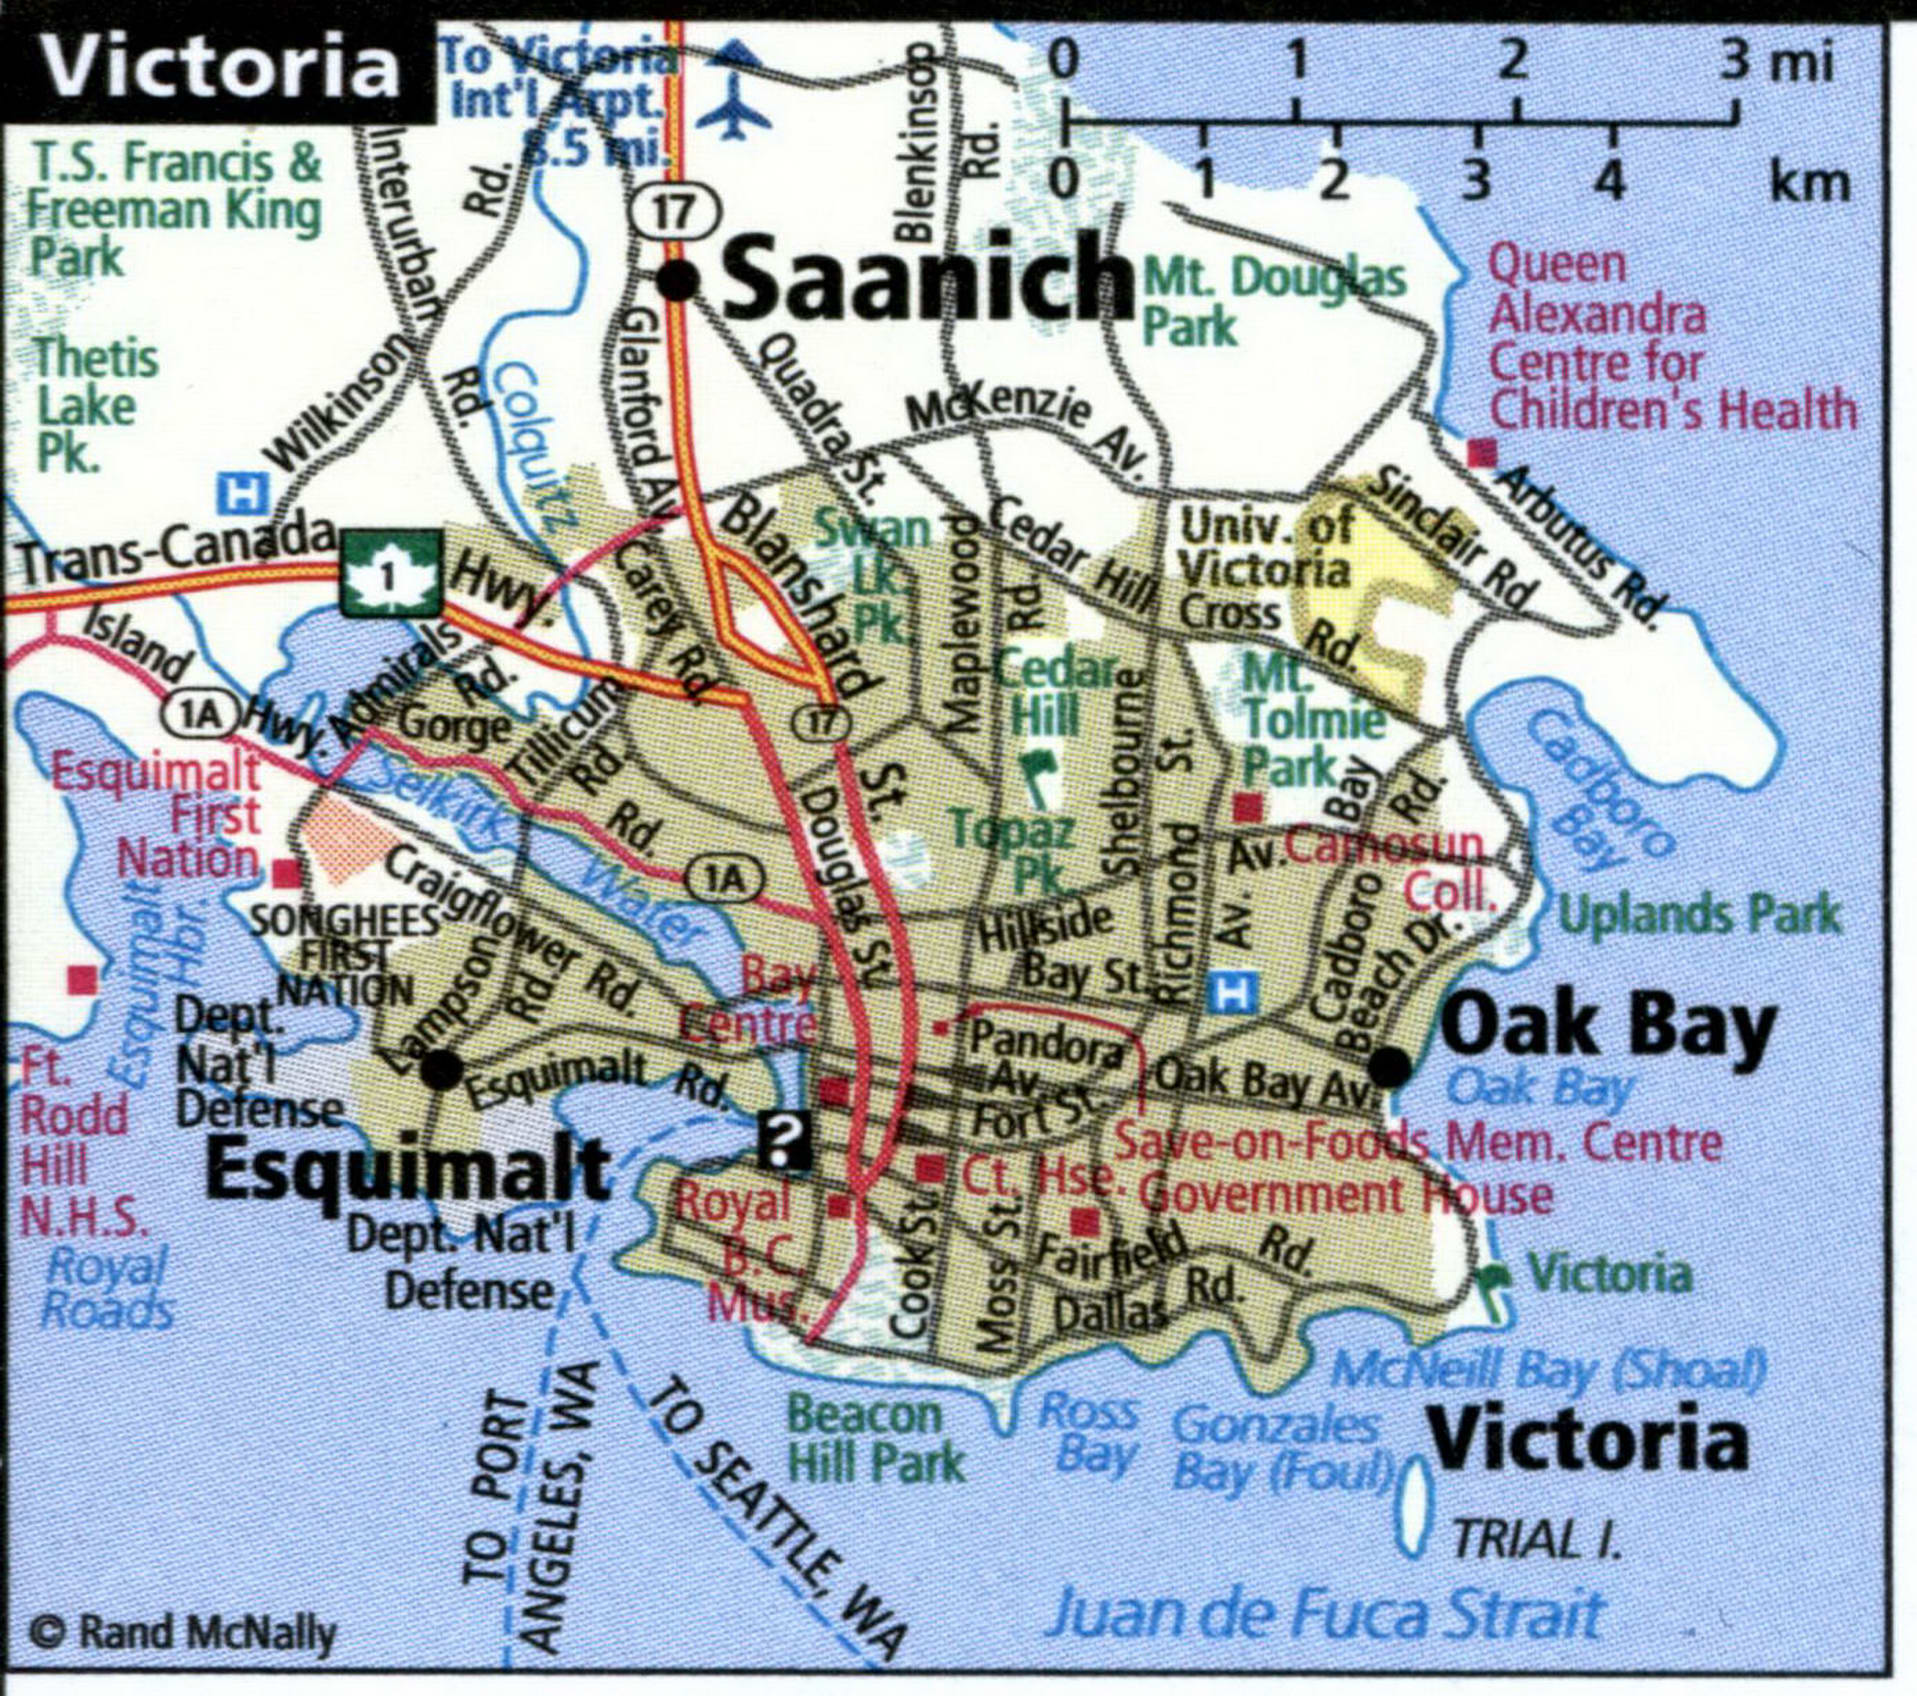 Victoria city map for truckers